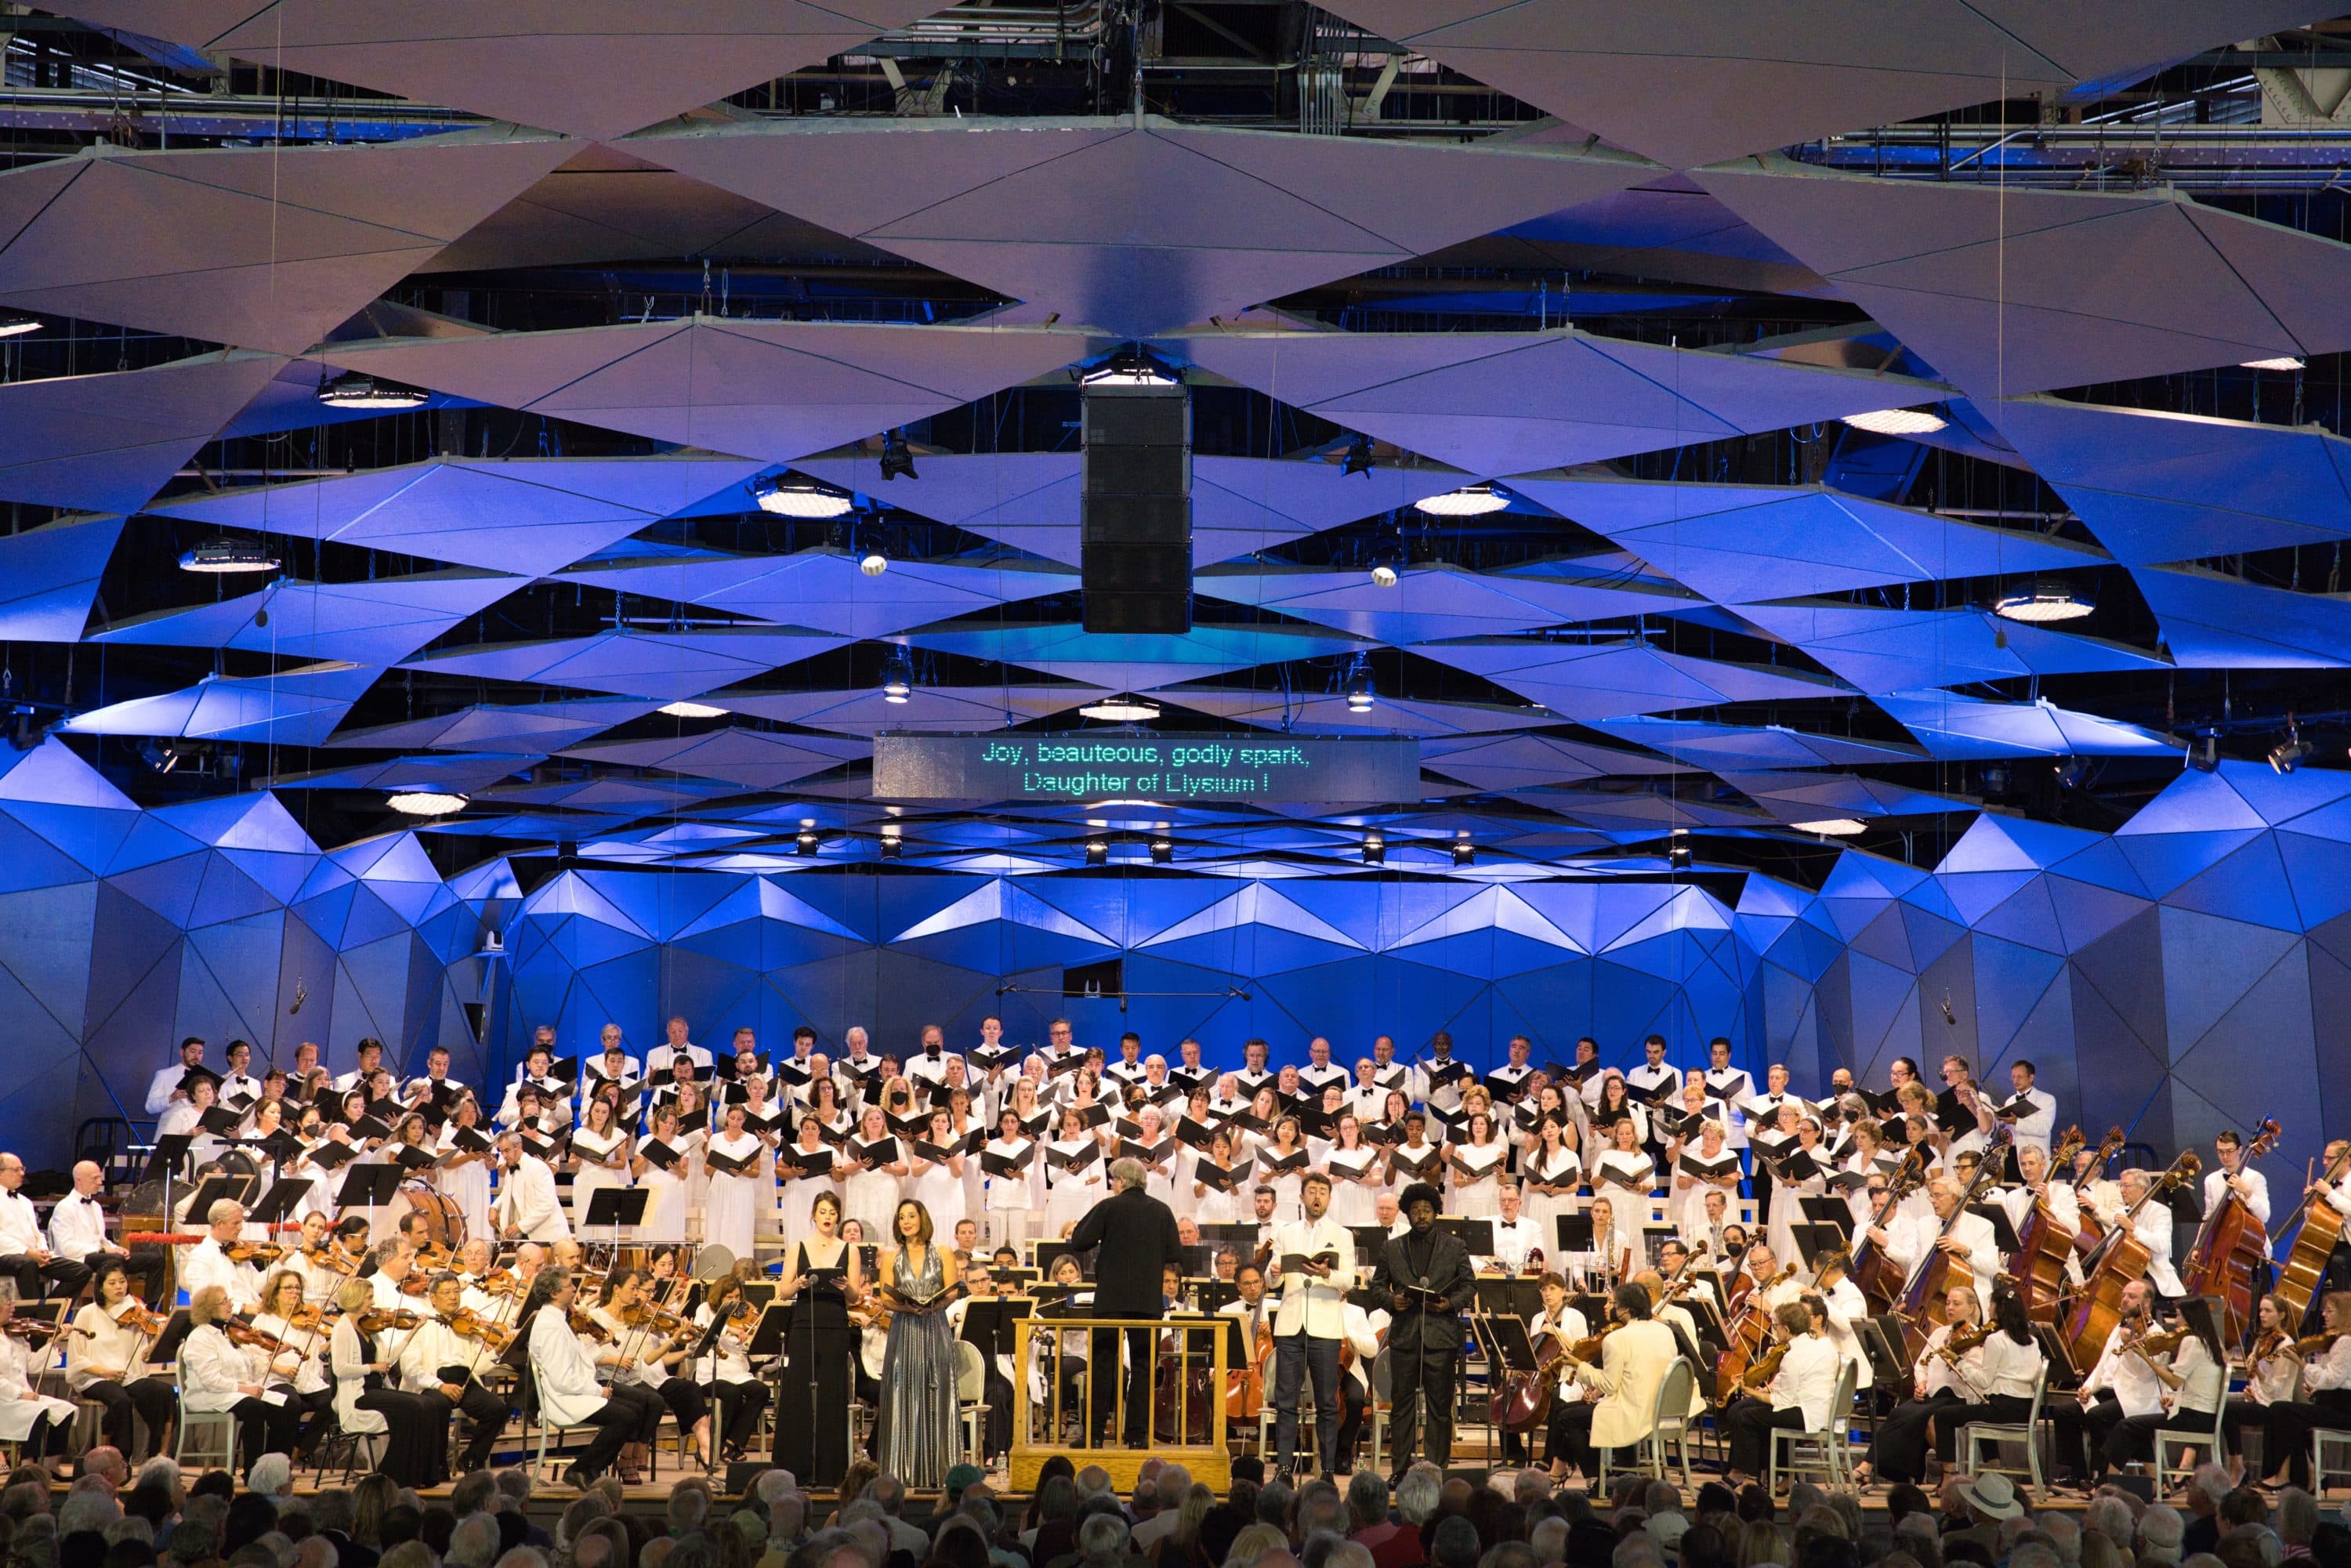 The BSO, Tanglewood Festival Chorus and conductor Michael Tilson Thomas perform Beethoven's Symphony No. 9 at Tanglewood. (Courtesy Hilary Scott)